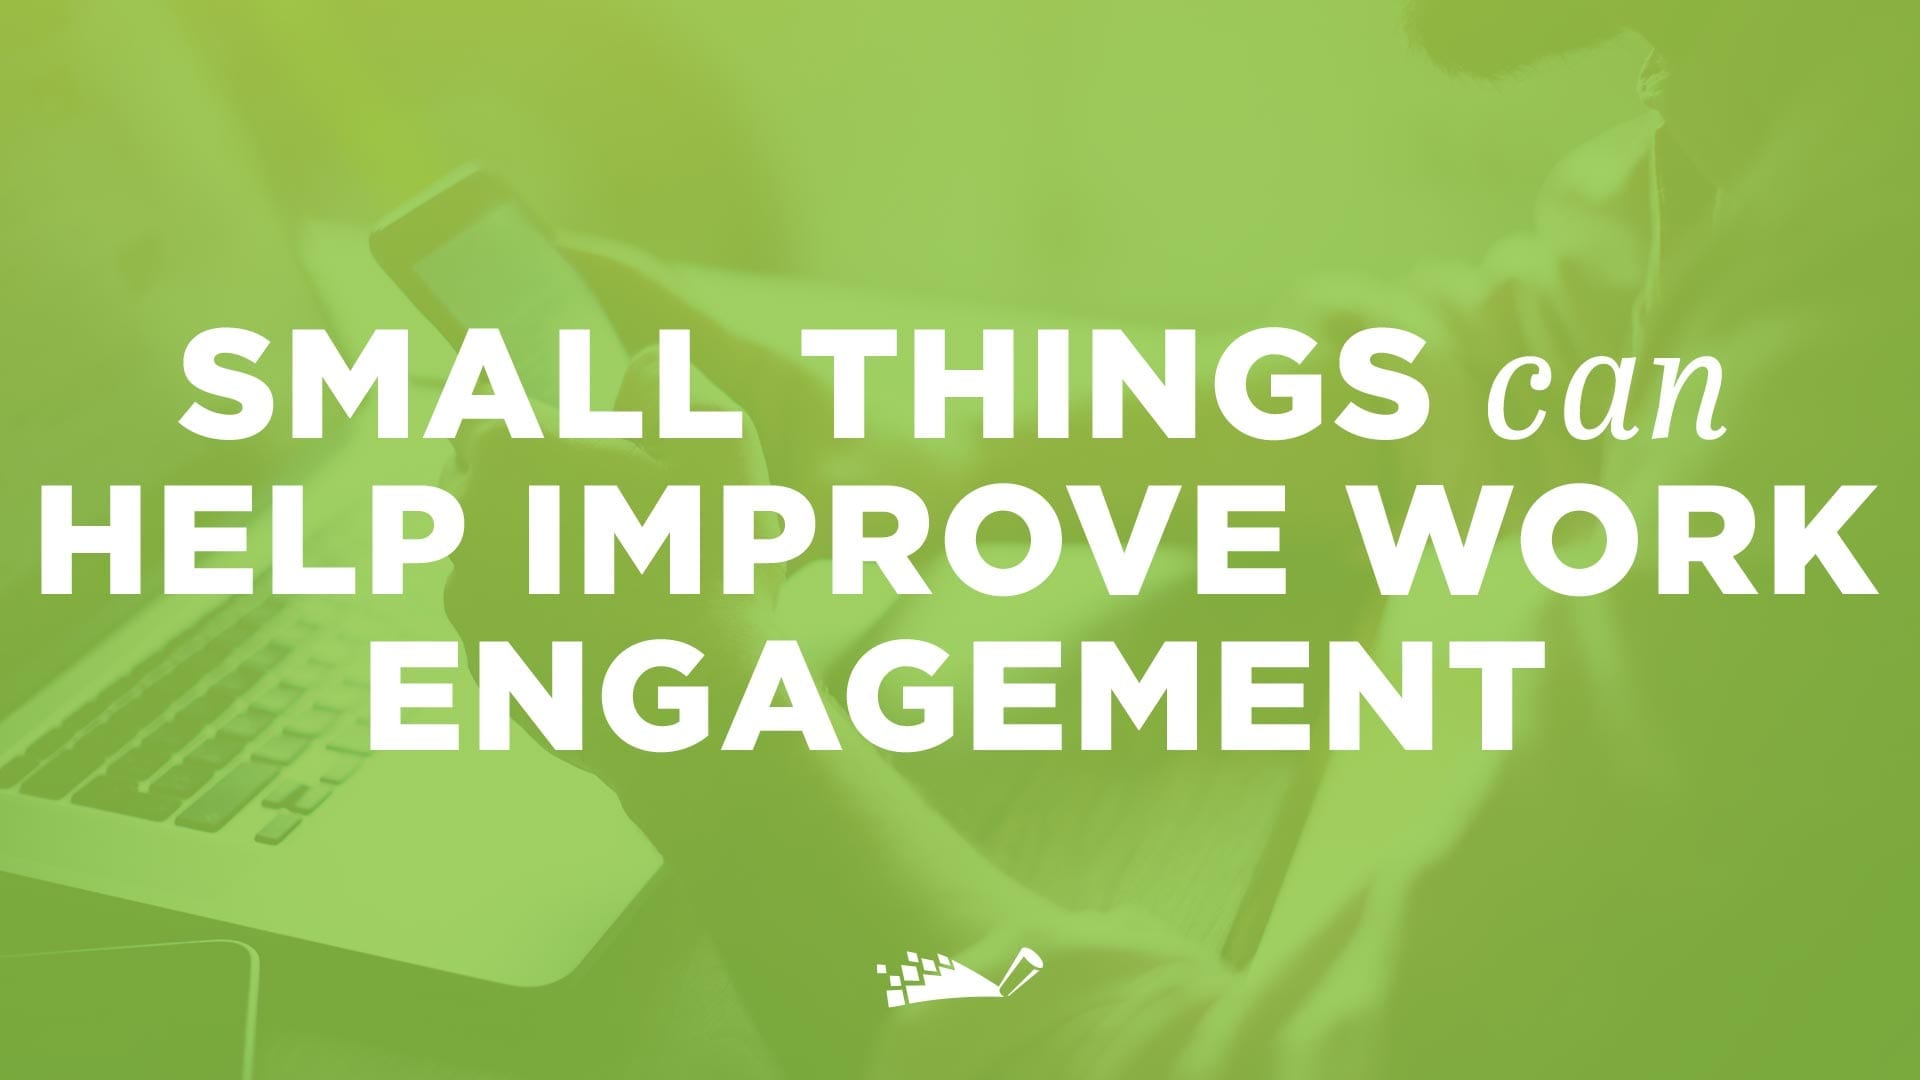 DigitalChalk: Small Things can Help Improve Work Engagement